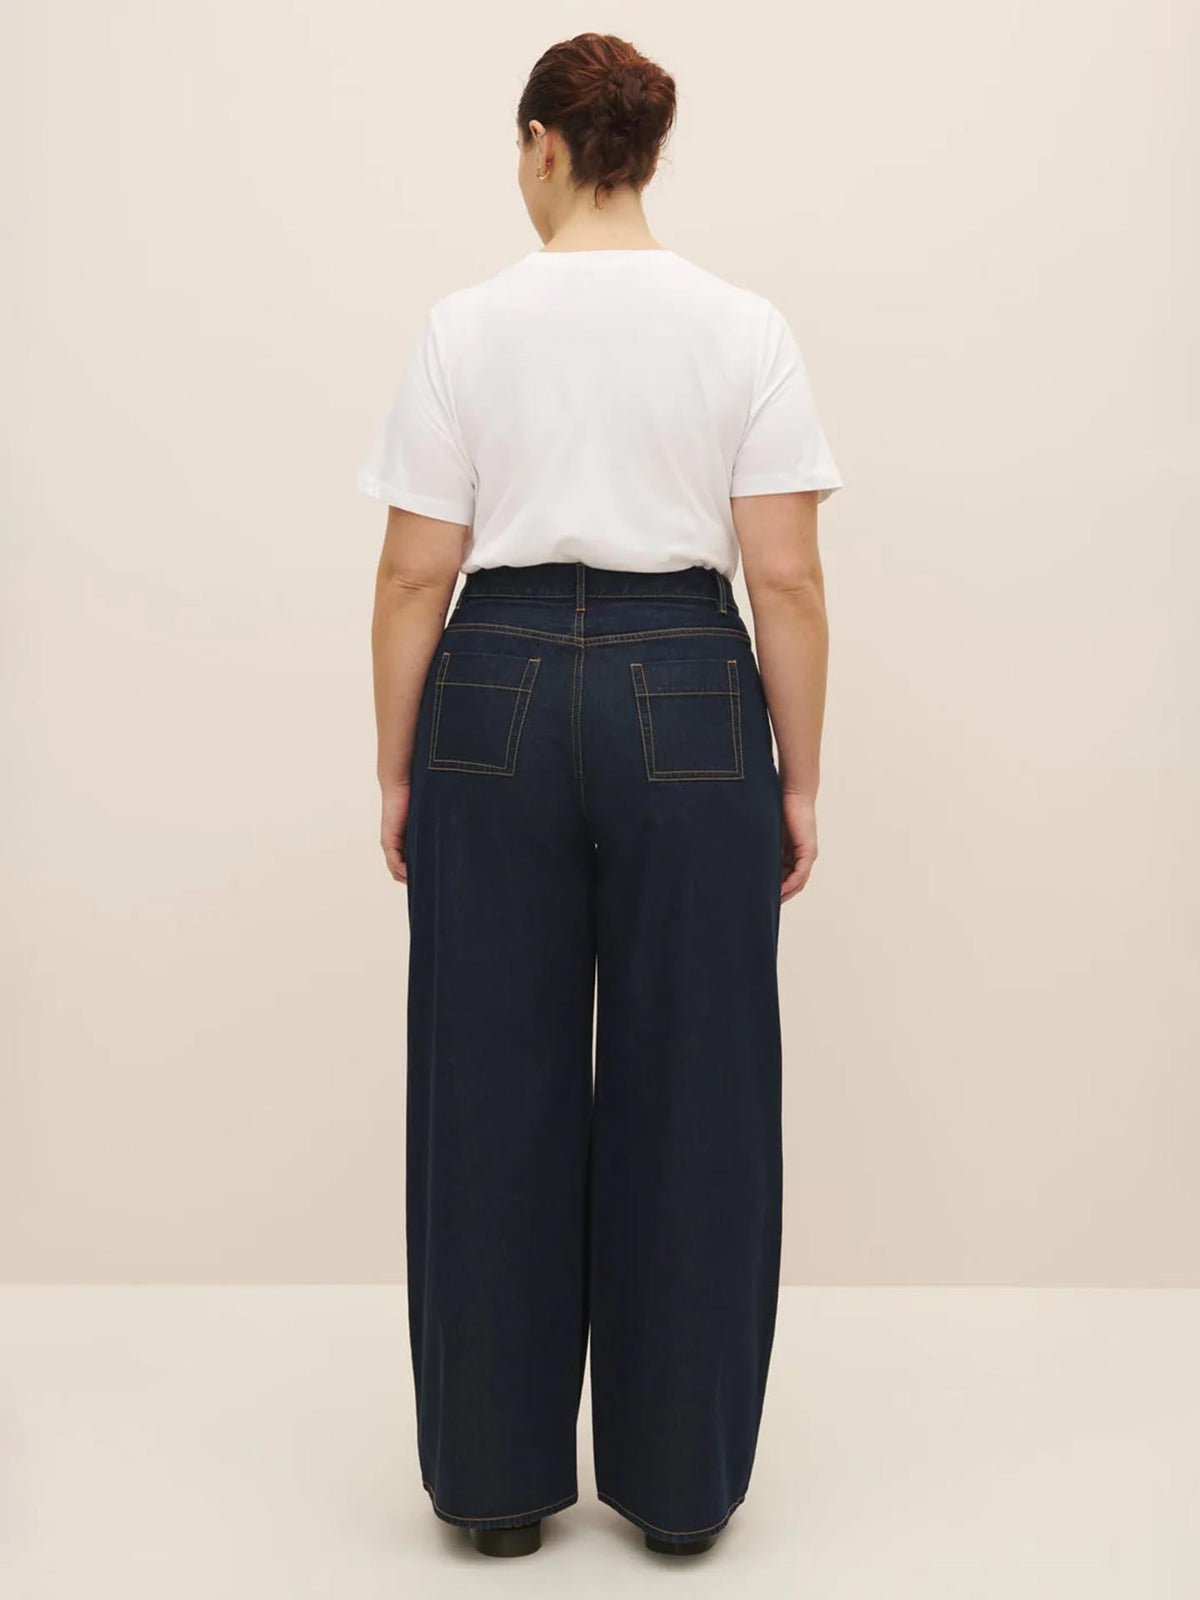 Woman from behind wearing high-waist Kowtow navy trousers and a white t-shirt against a neutral background.